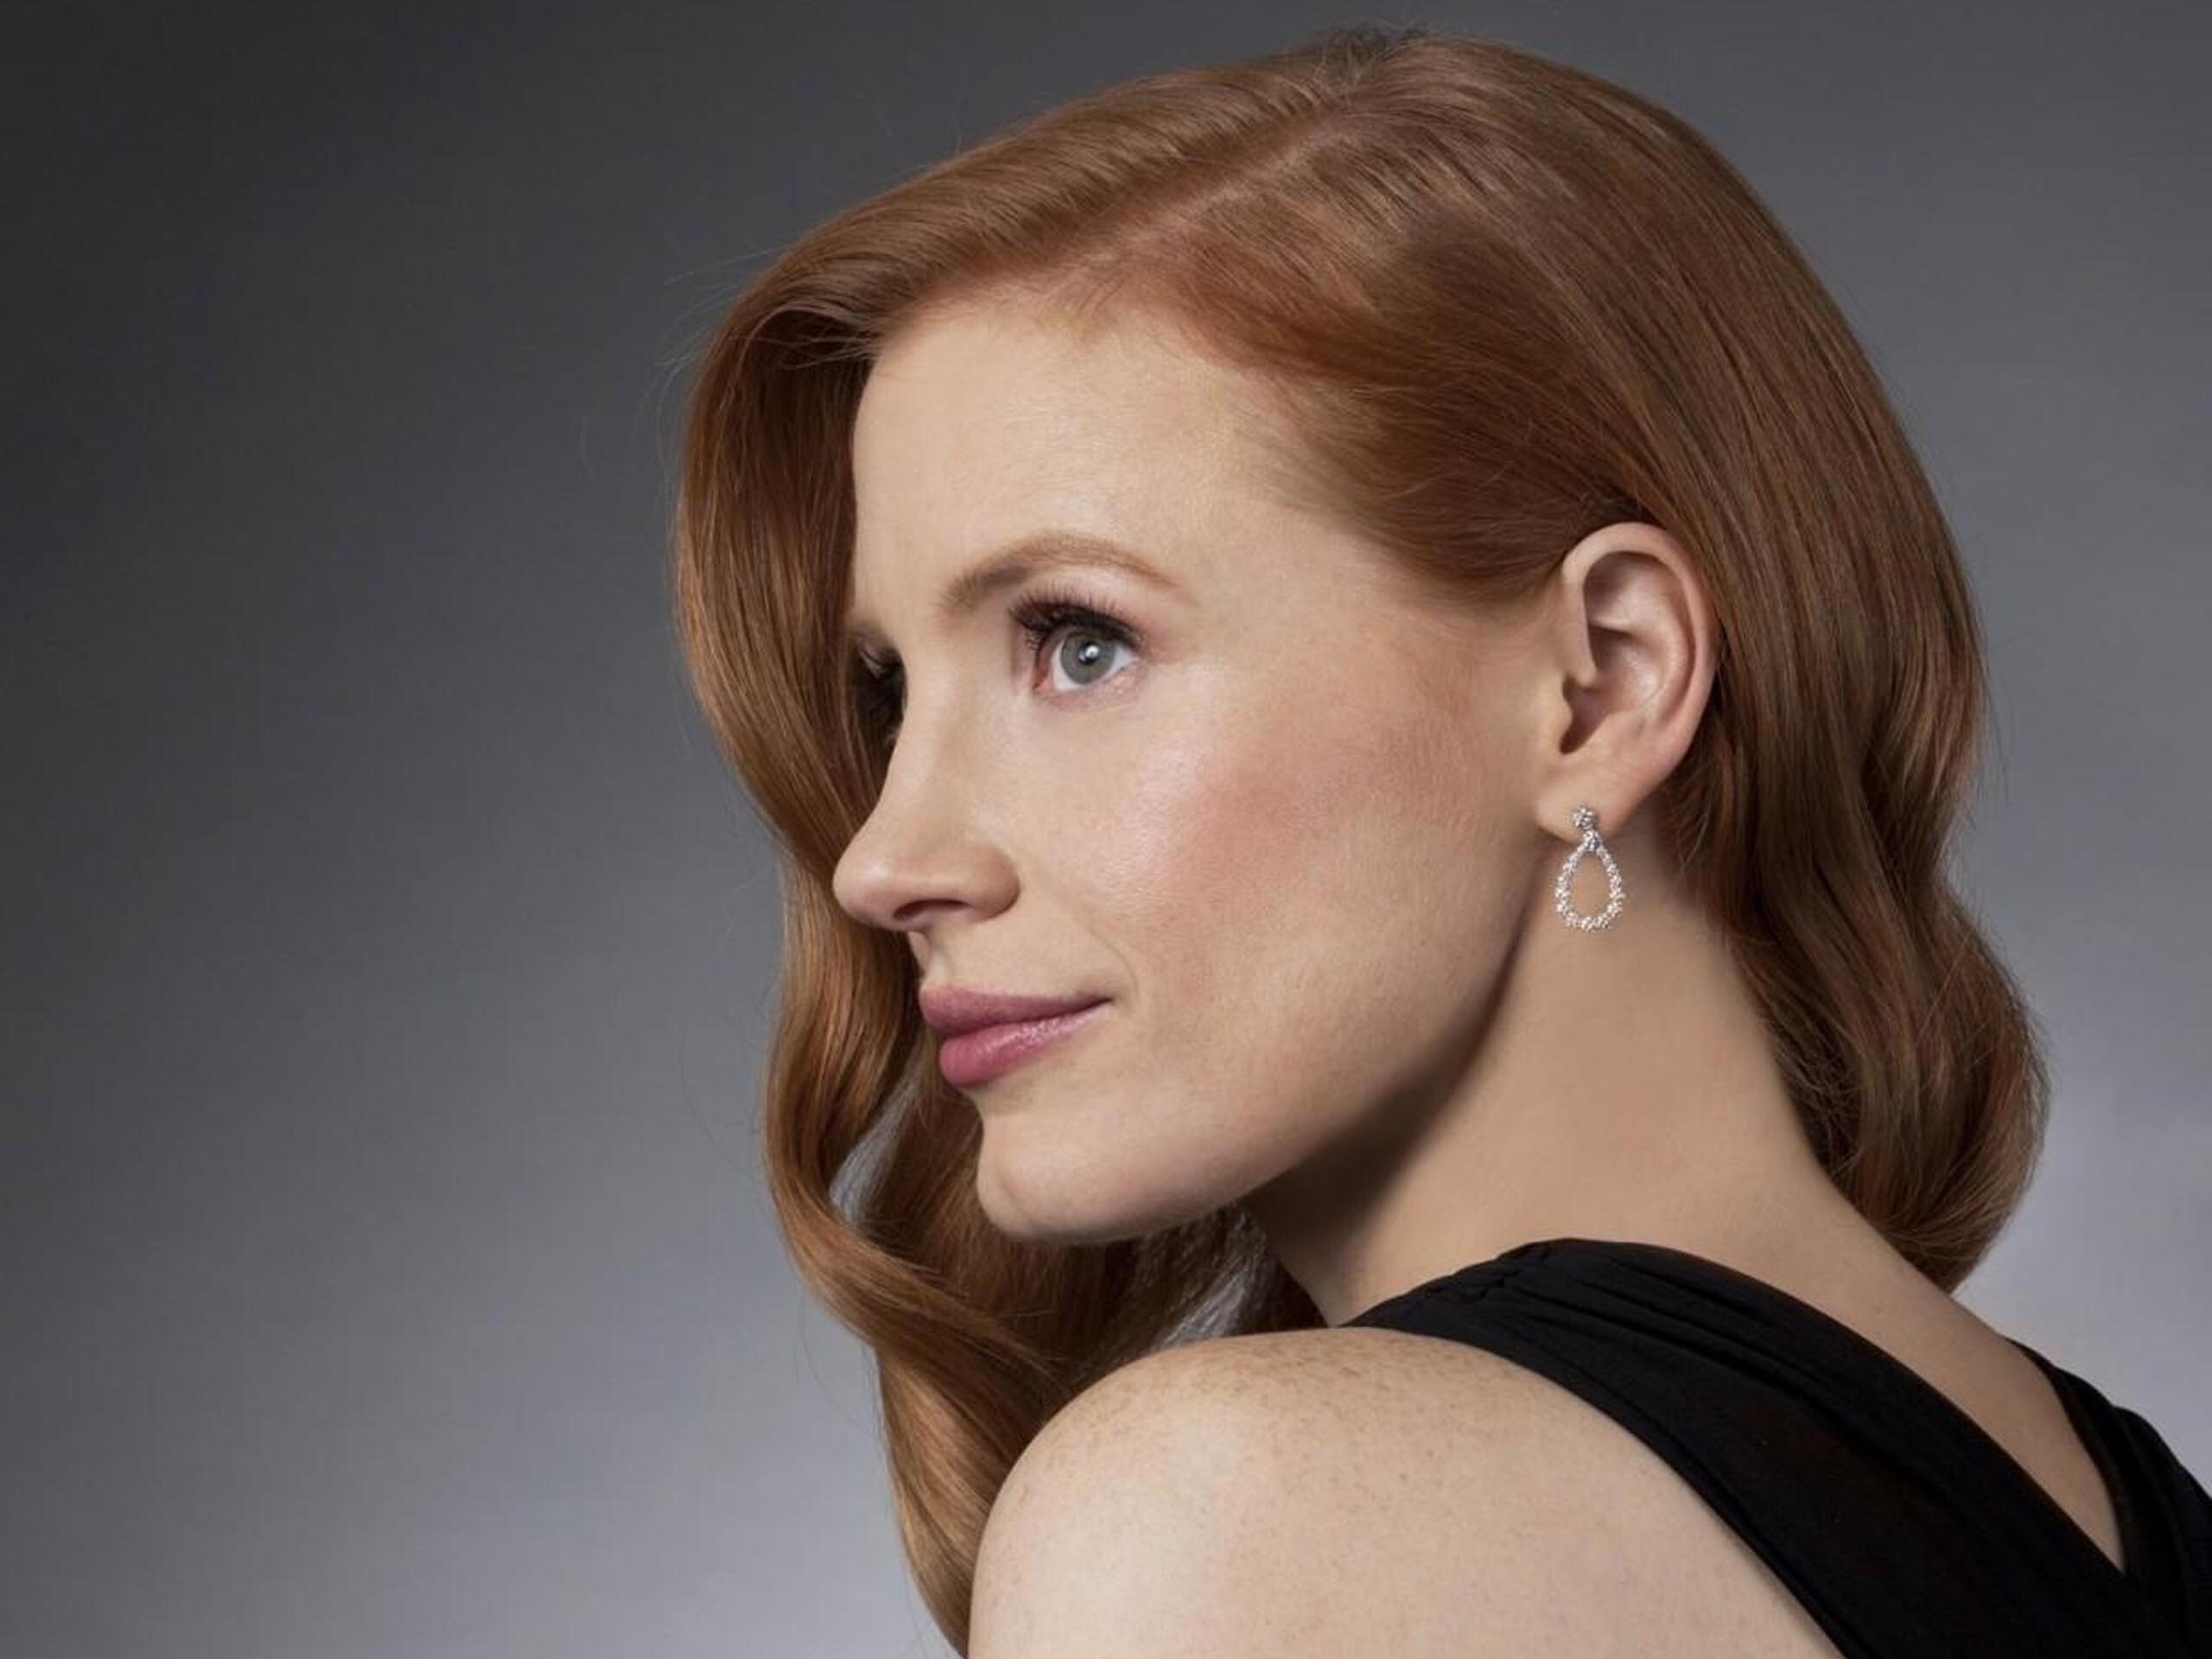 Jessica Chastain: Received Oscar nomination for playing a CIA analyst in the thriller Zero Dark Thirty (2012). 2560x1920 HD Background.